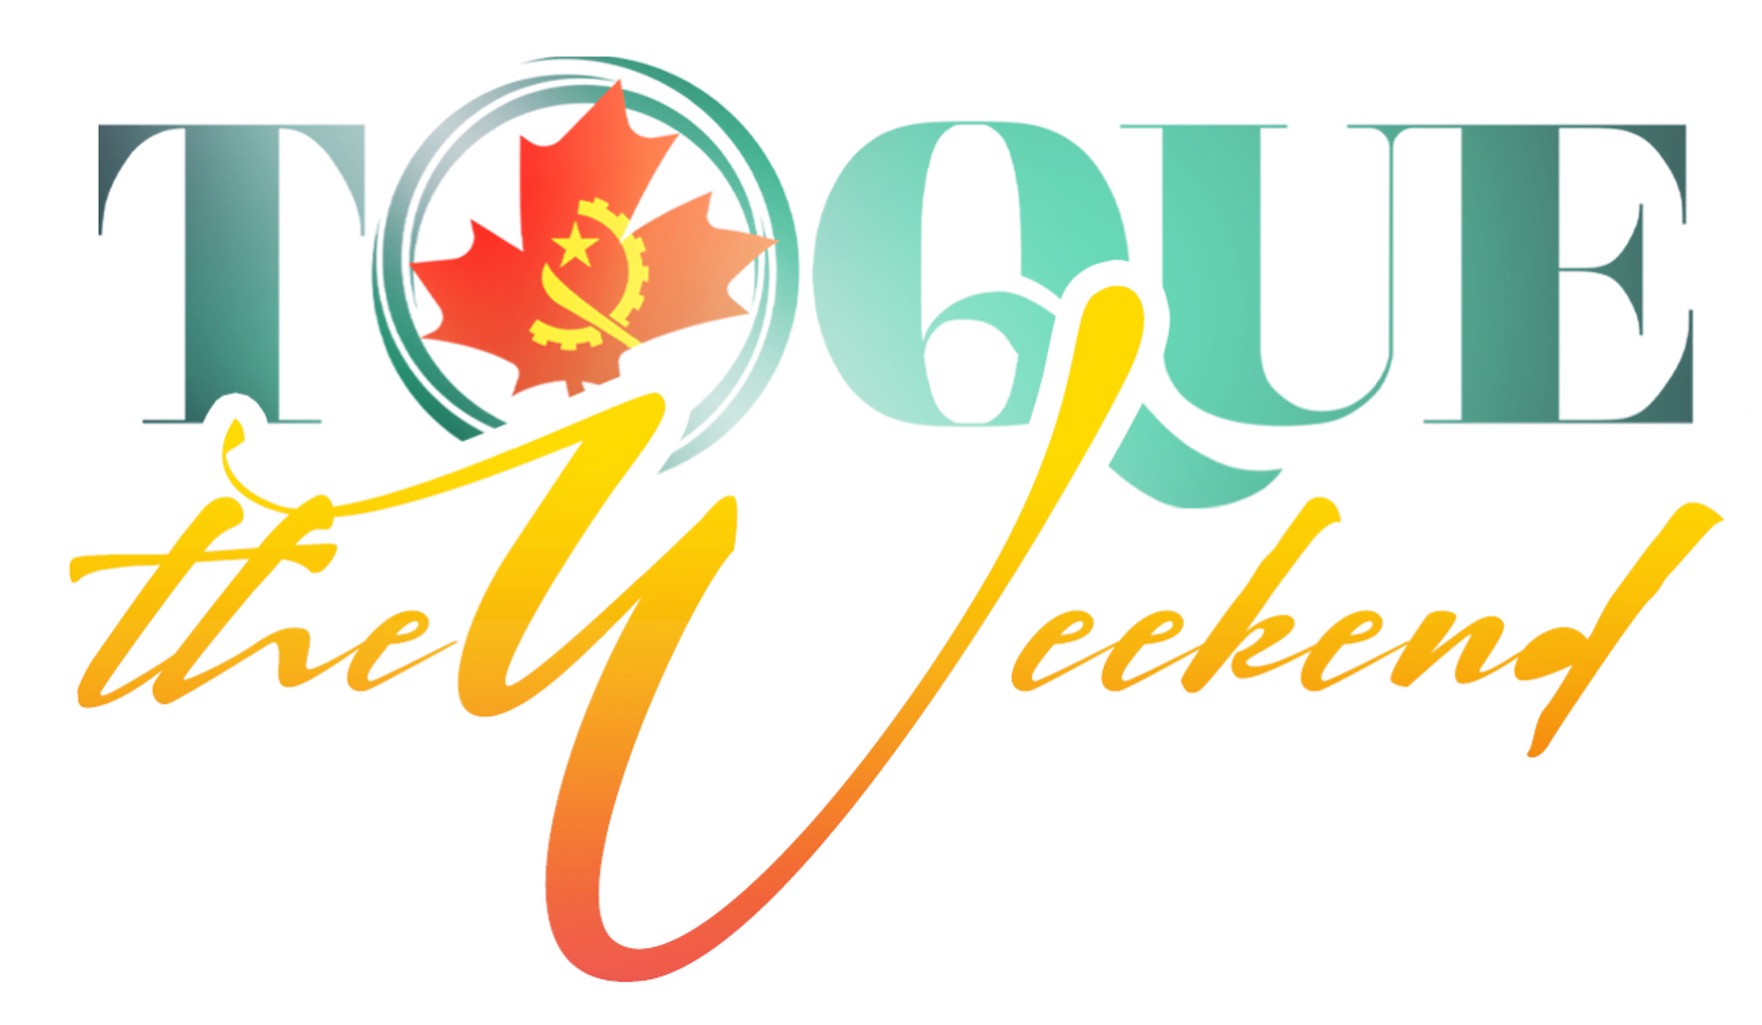 Toque The Weekend logo